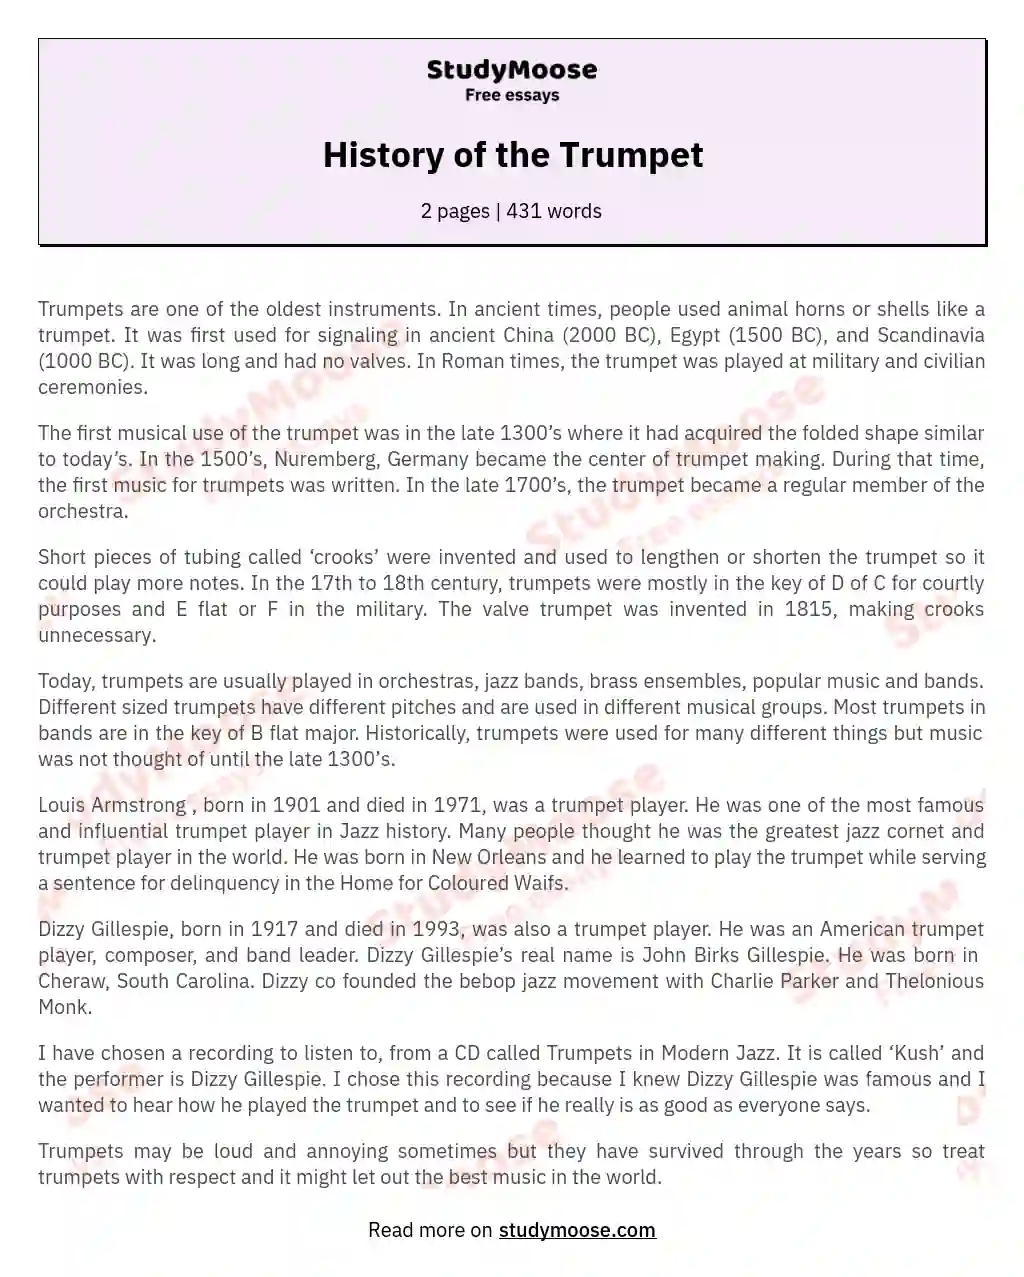 History of the Trumpet essay